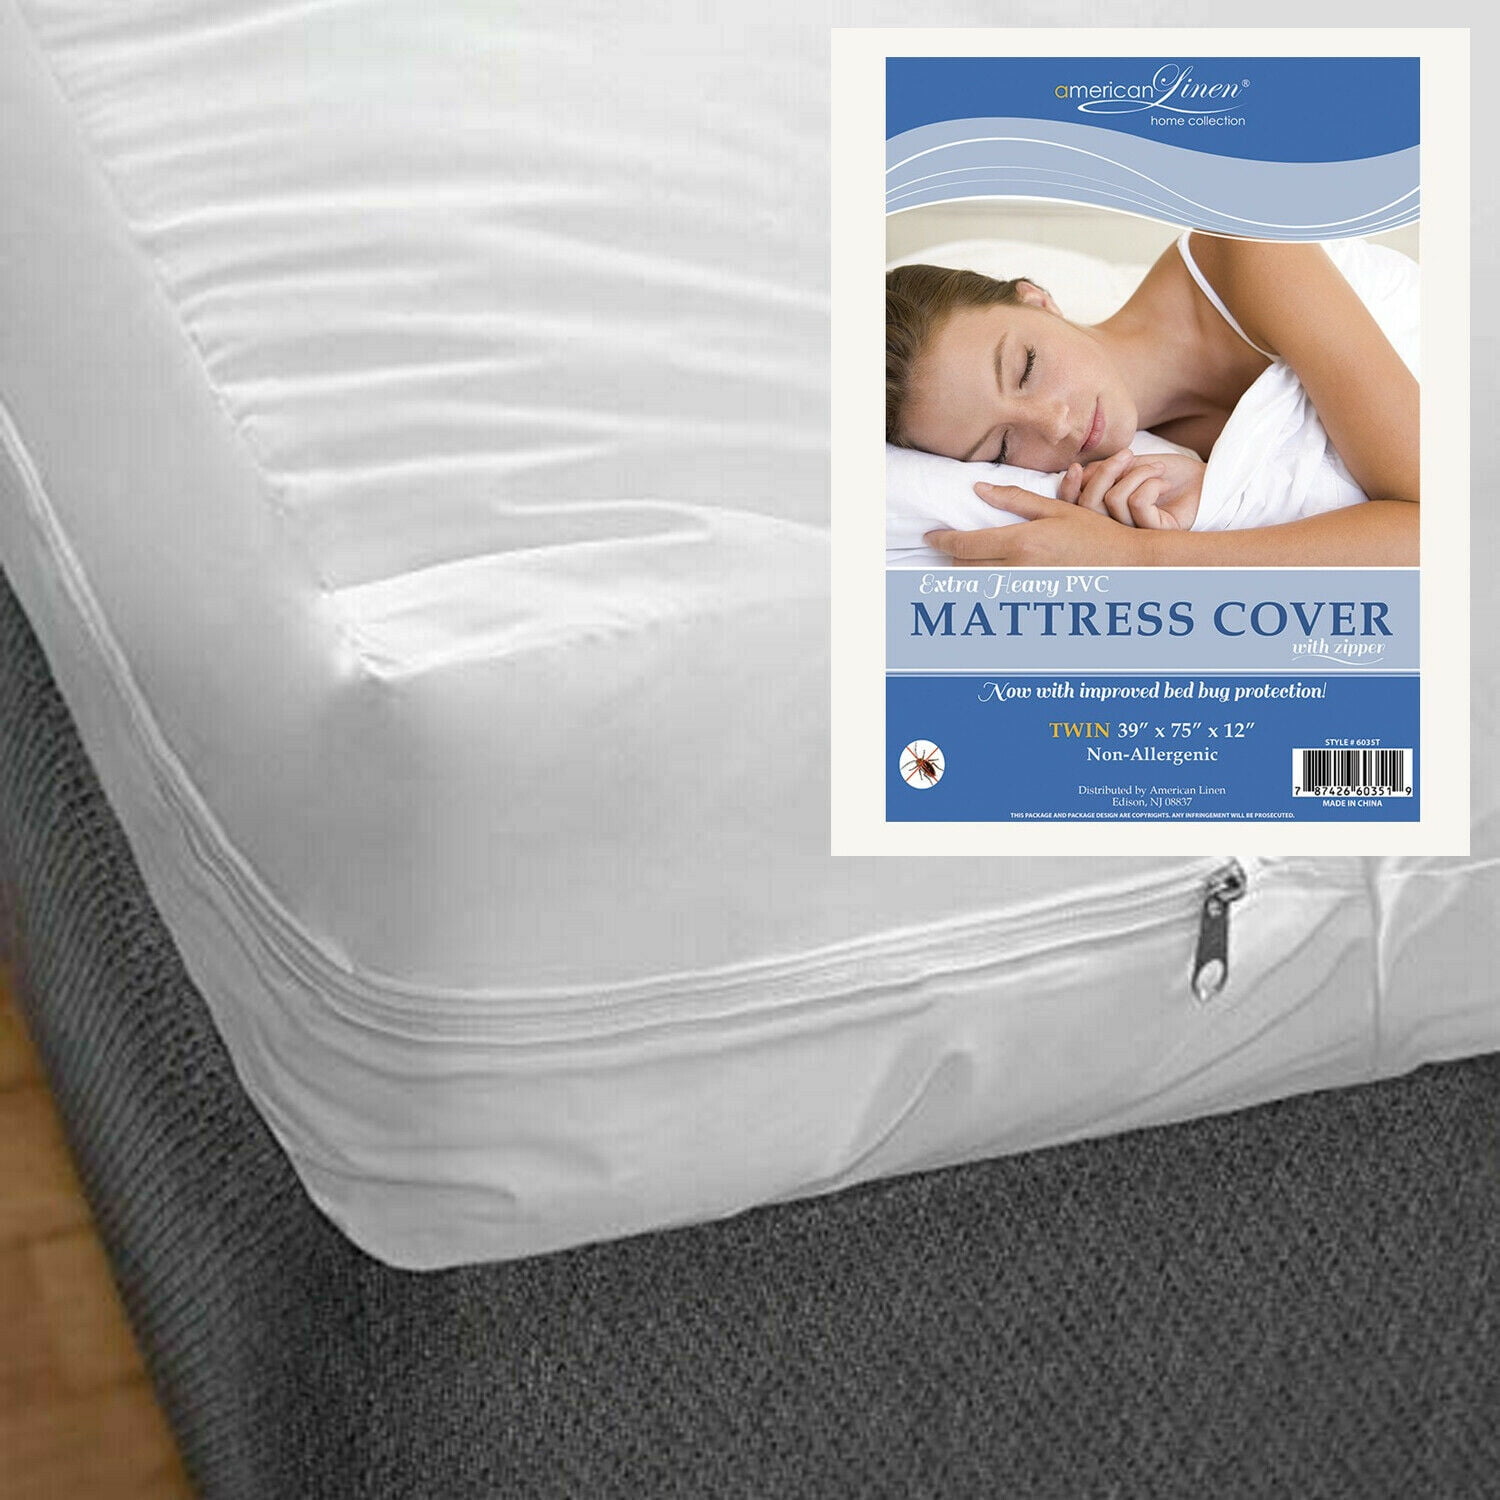 Double White WATERPROOF MATTRESS PROTECTOR COVER FITTED VINYL MATRESS Wetting 